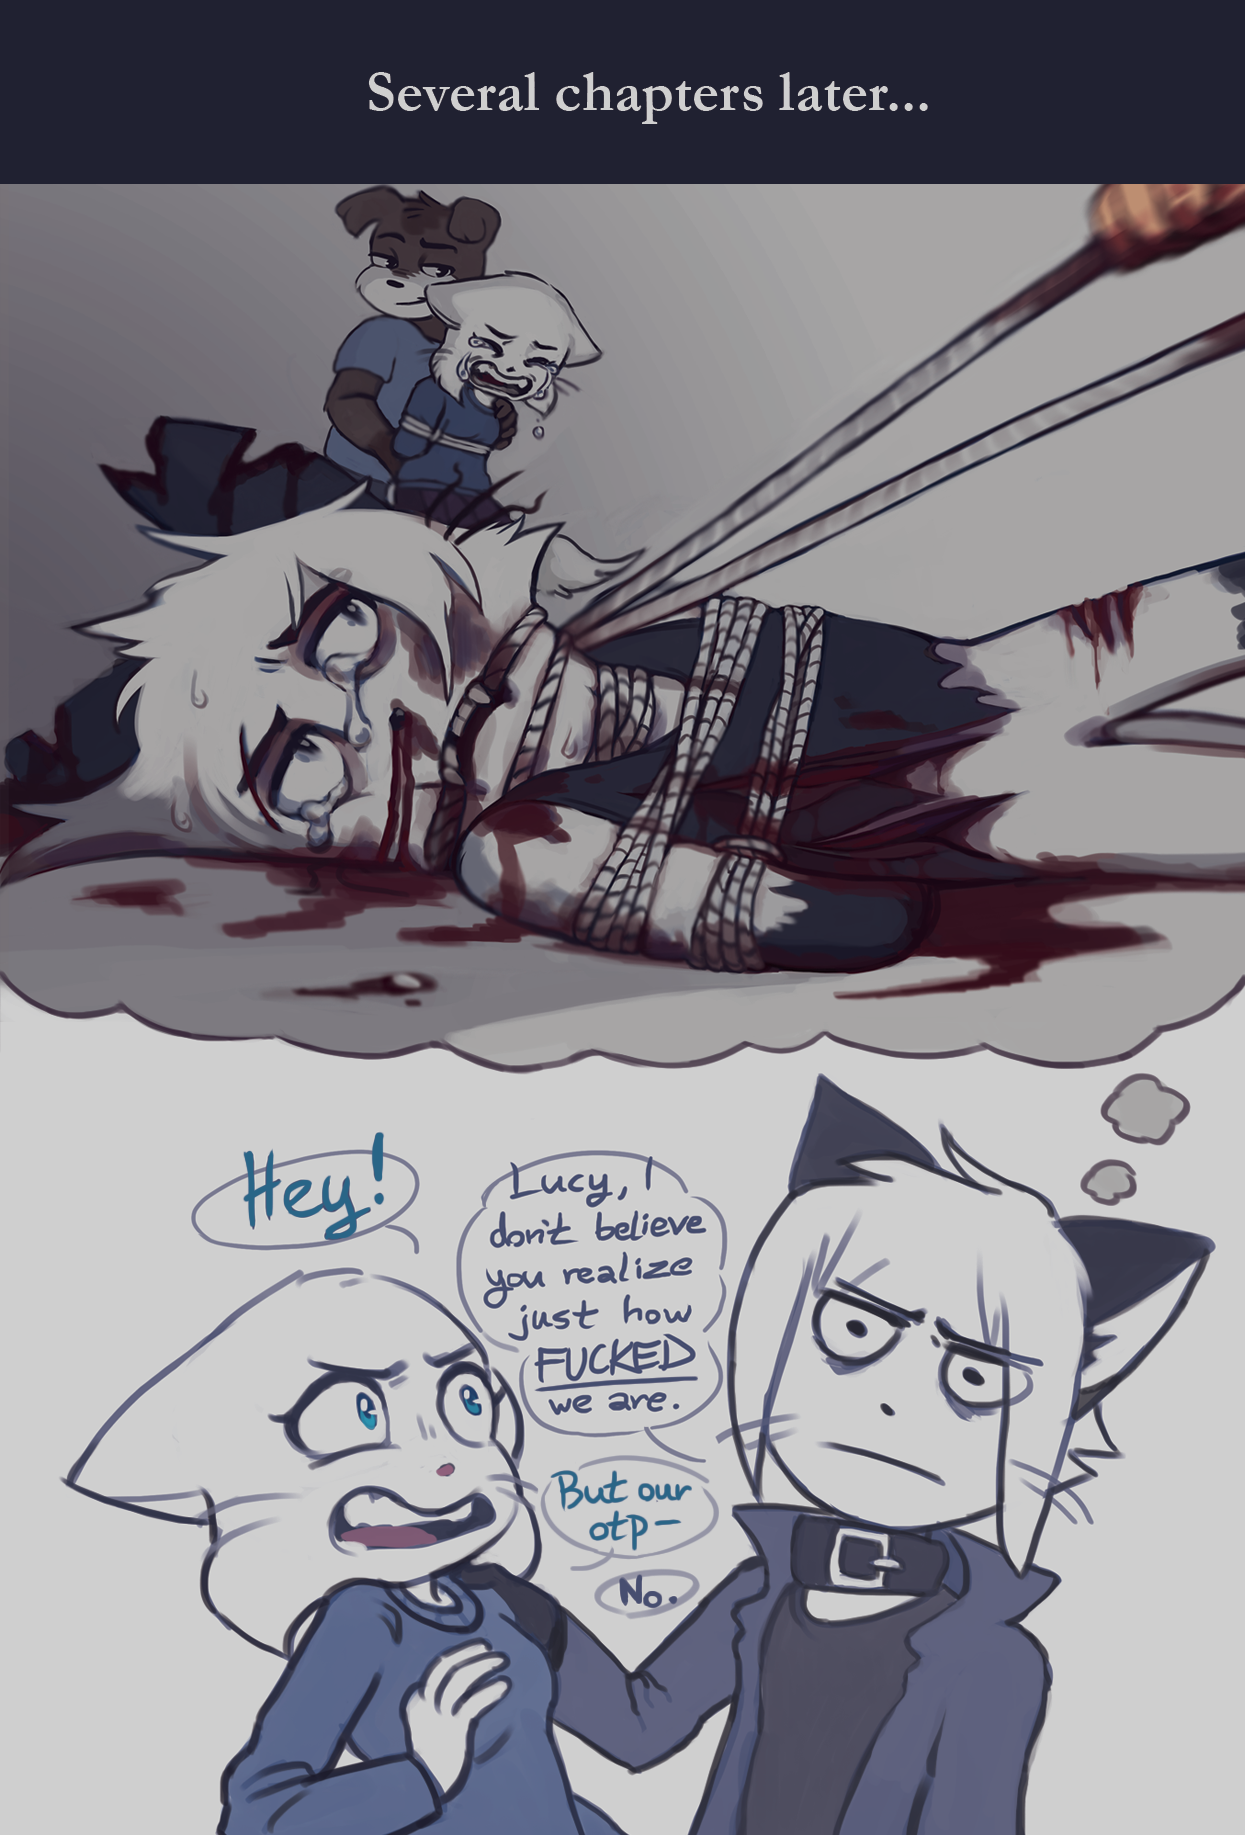 Candybooru image #11836, tagged with Augustus AugustusxLucy IronZelly_(Artist) Lucy blood comic